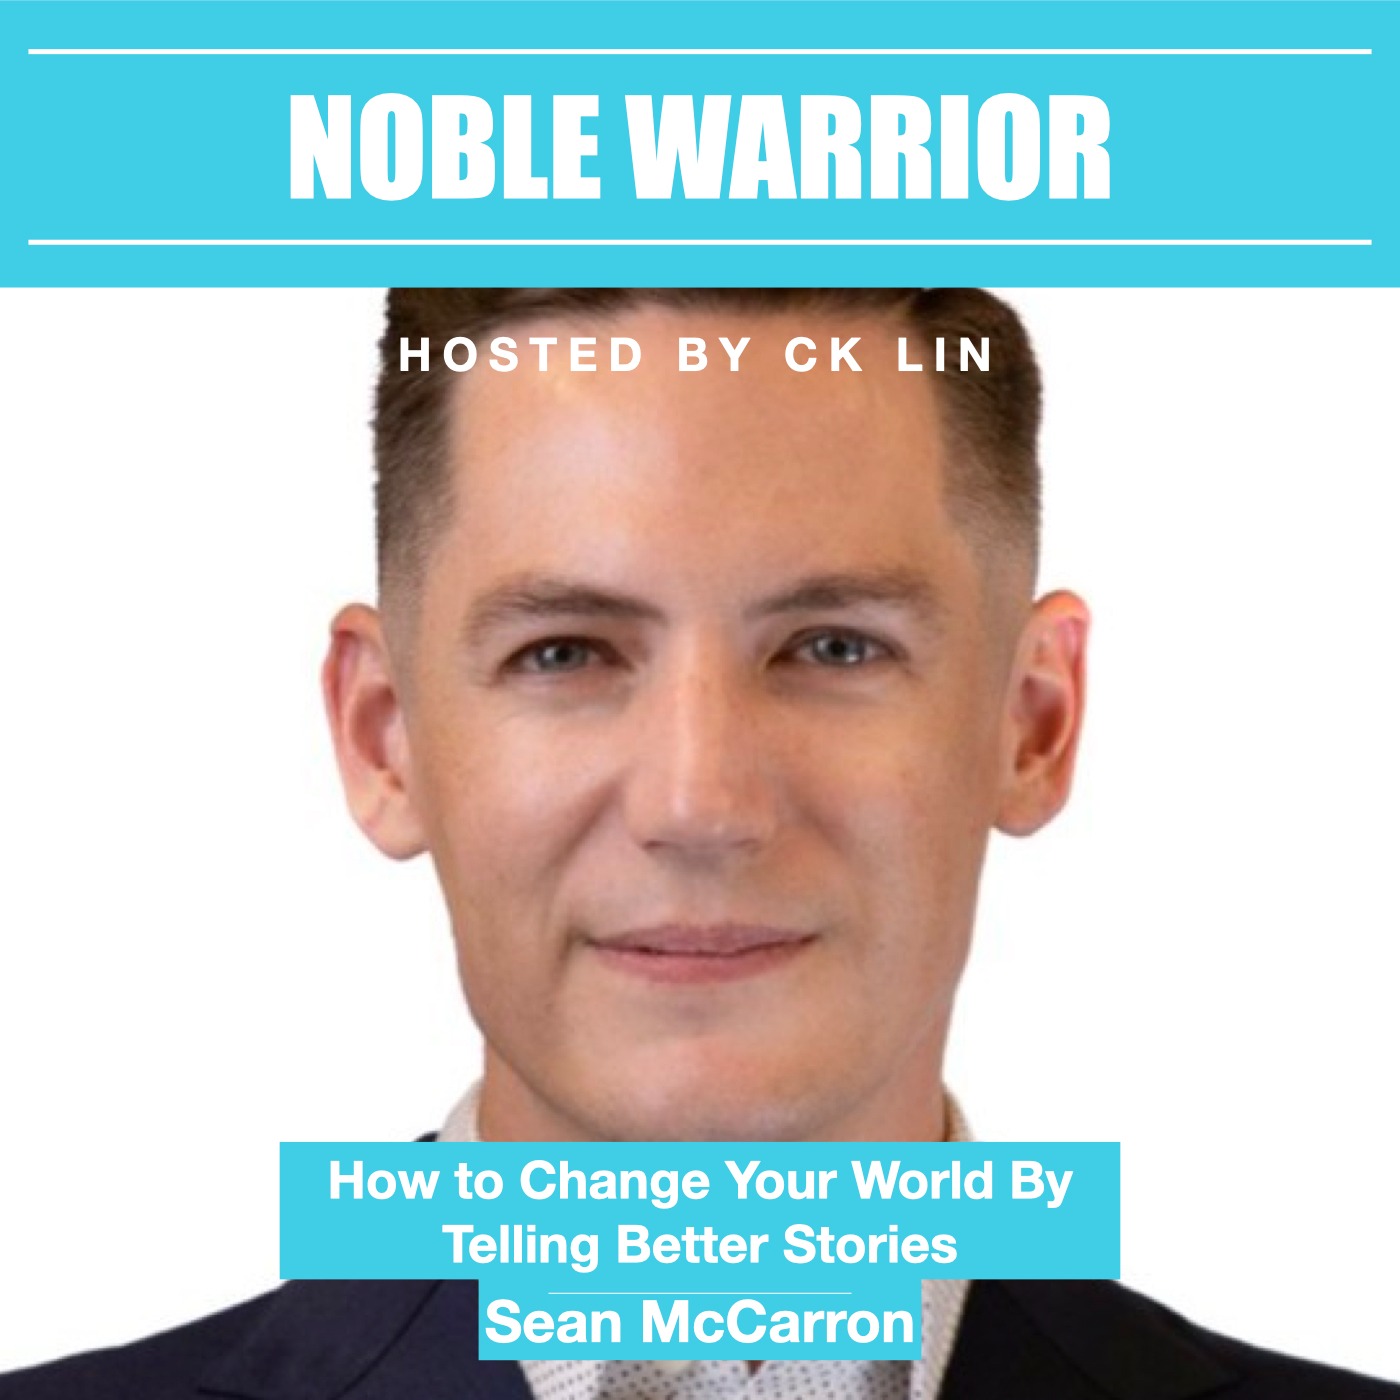 011 Sean McCarron: How to Change Your World By Telling Better Stories